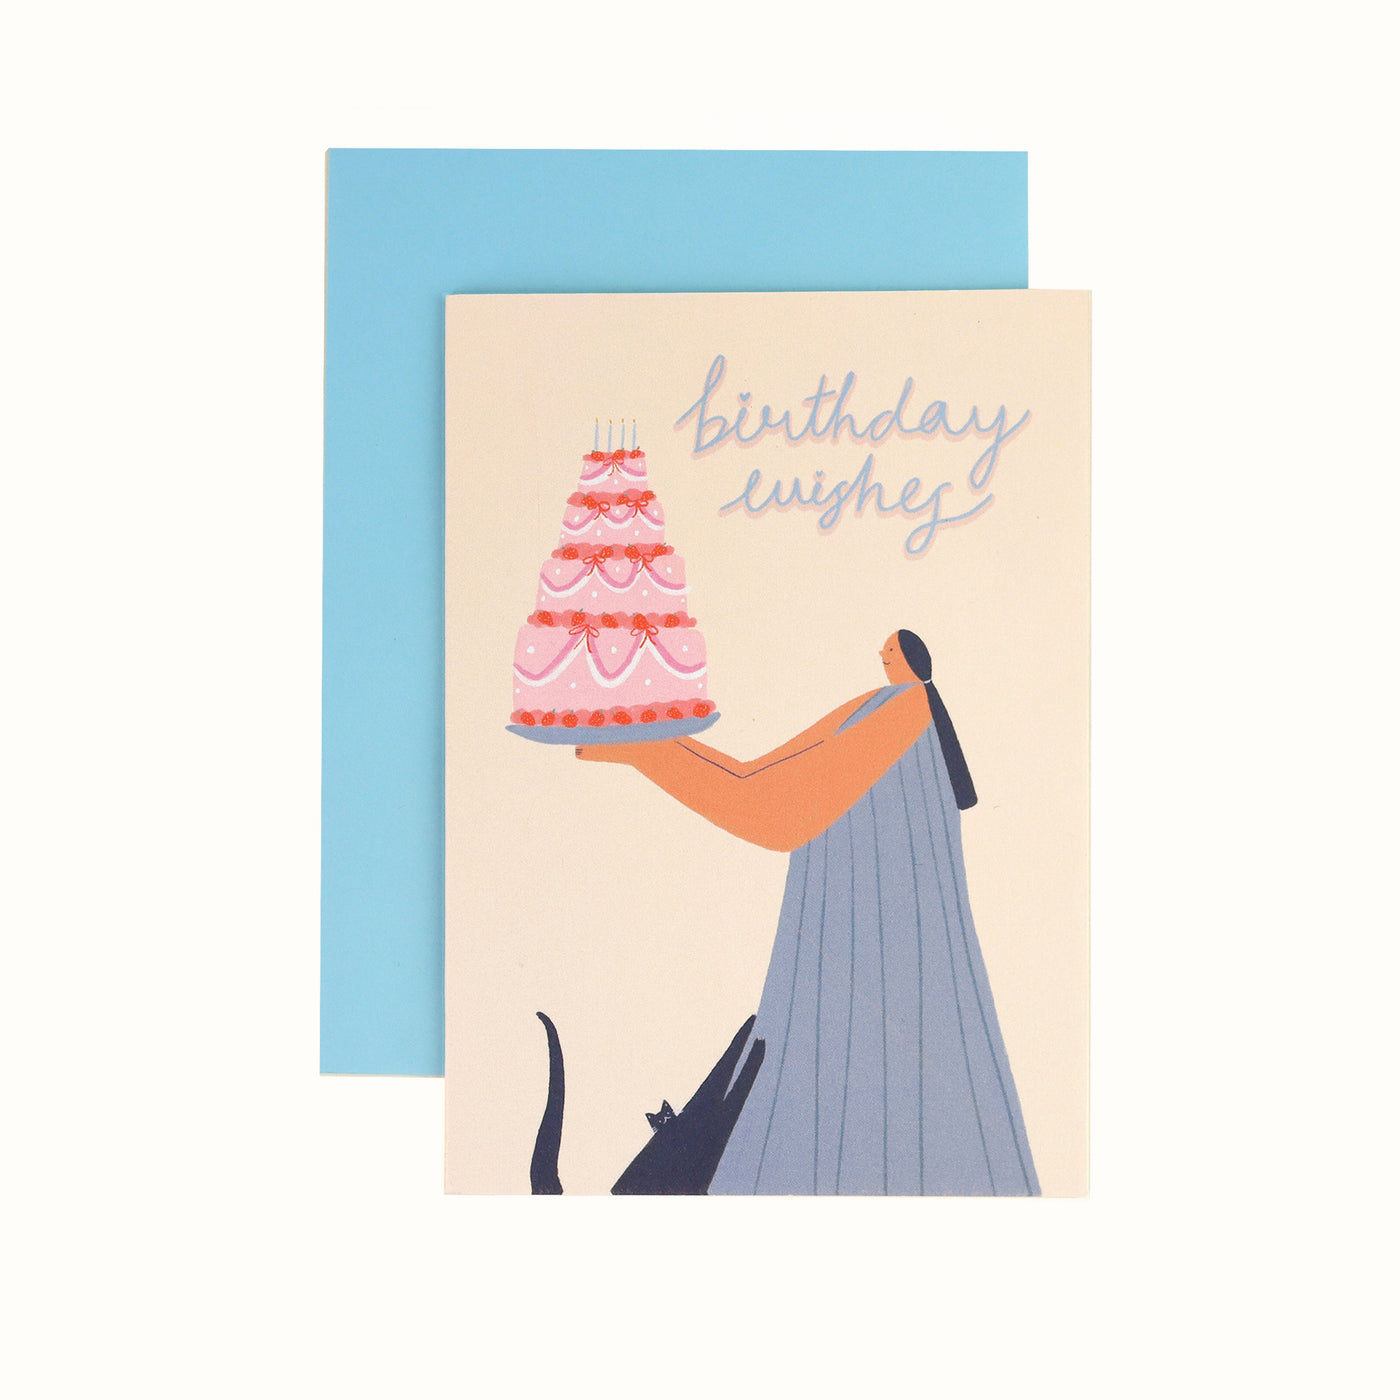 Cake and Cat Birthday Wishes Card